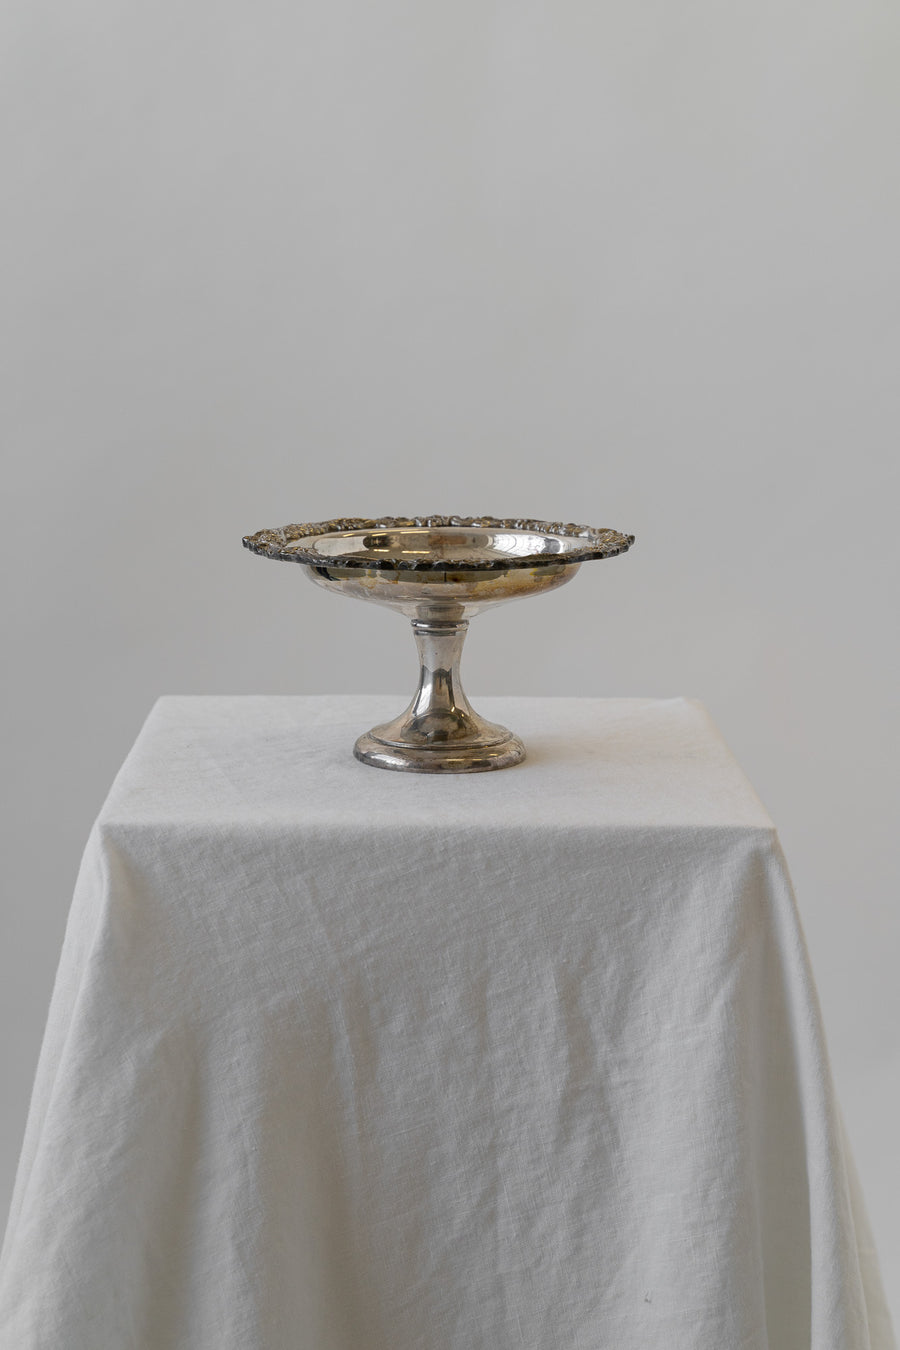 Antique Tall Silver Dish